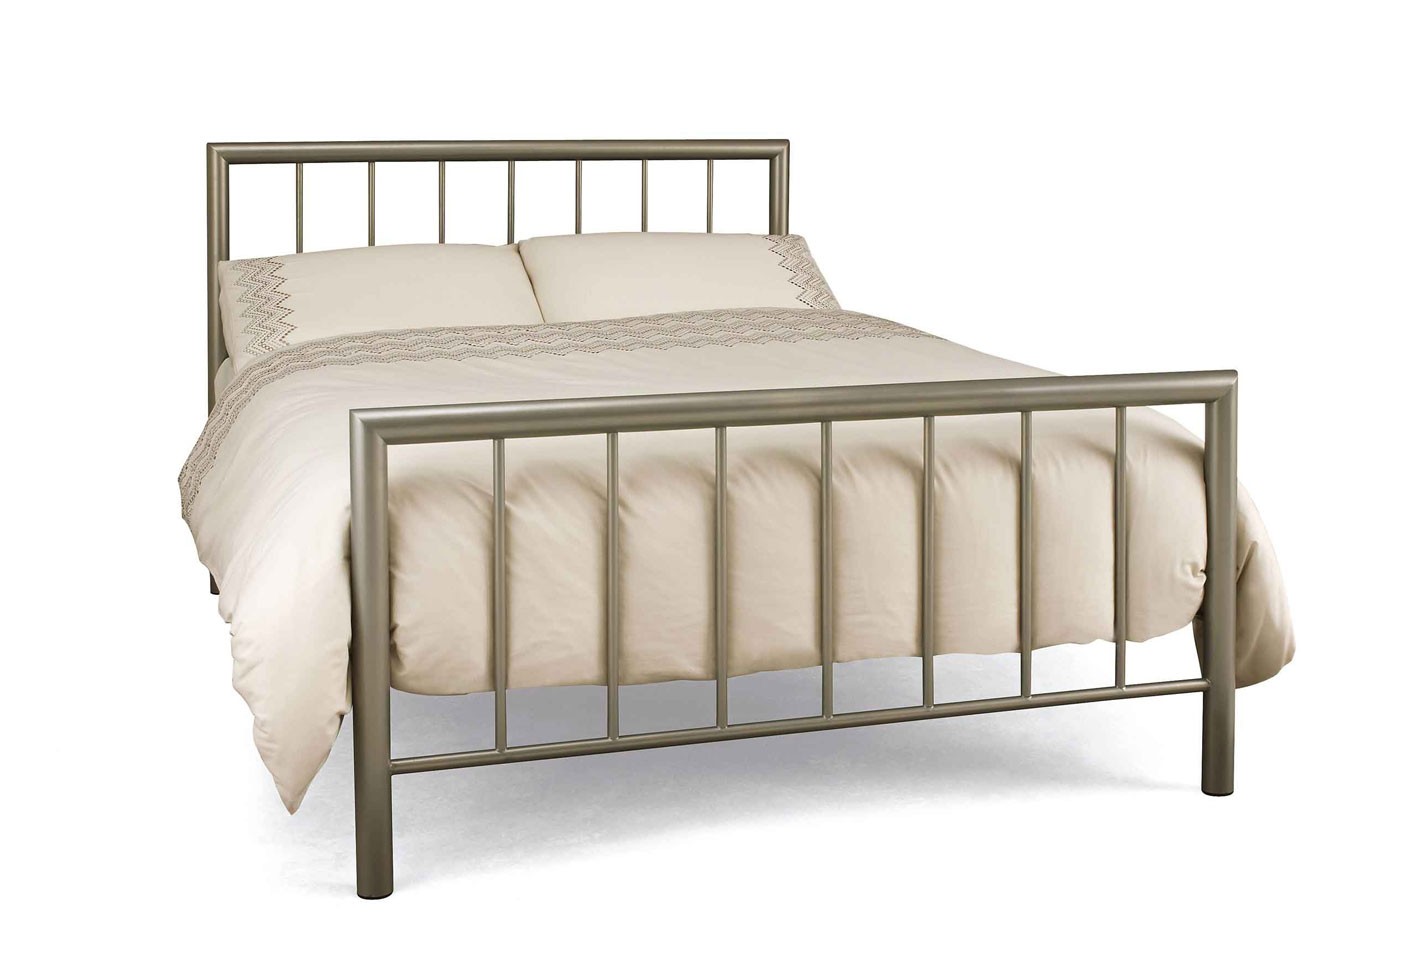 Modena Metal Bed Assembly Instructions (Serene)